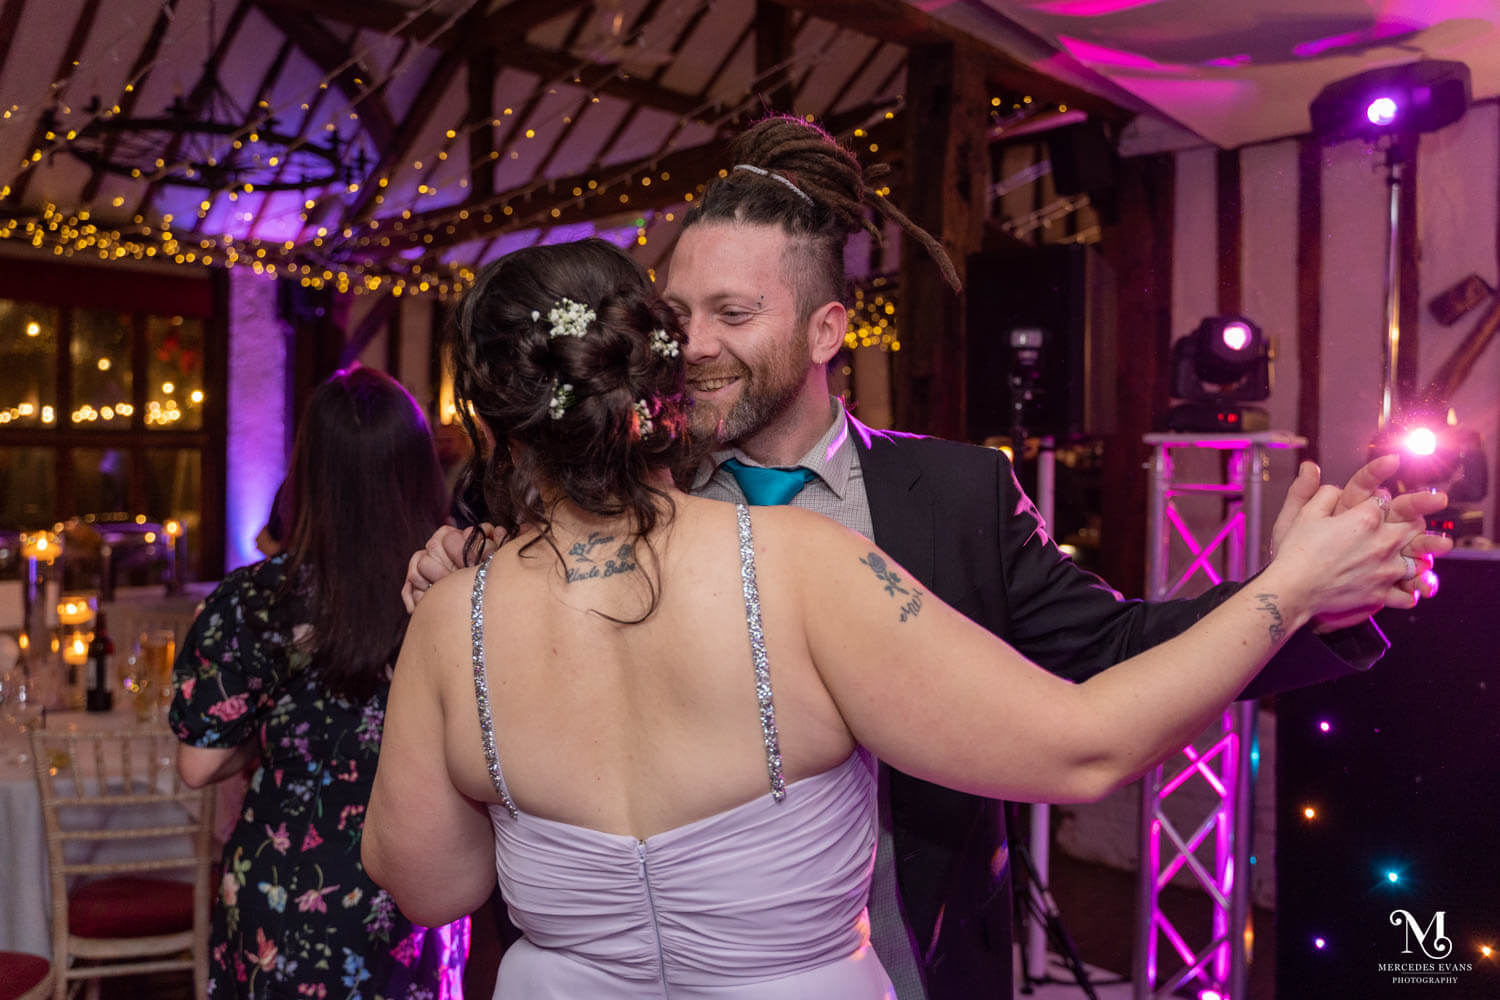 a bridesmaid and partner dance together in the evening